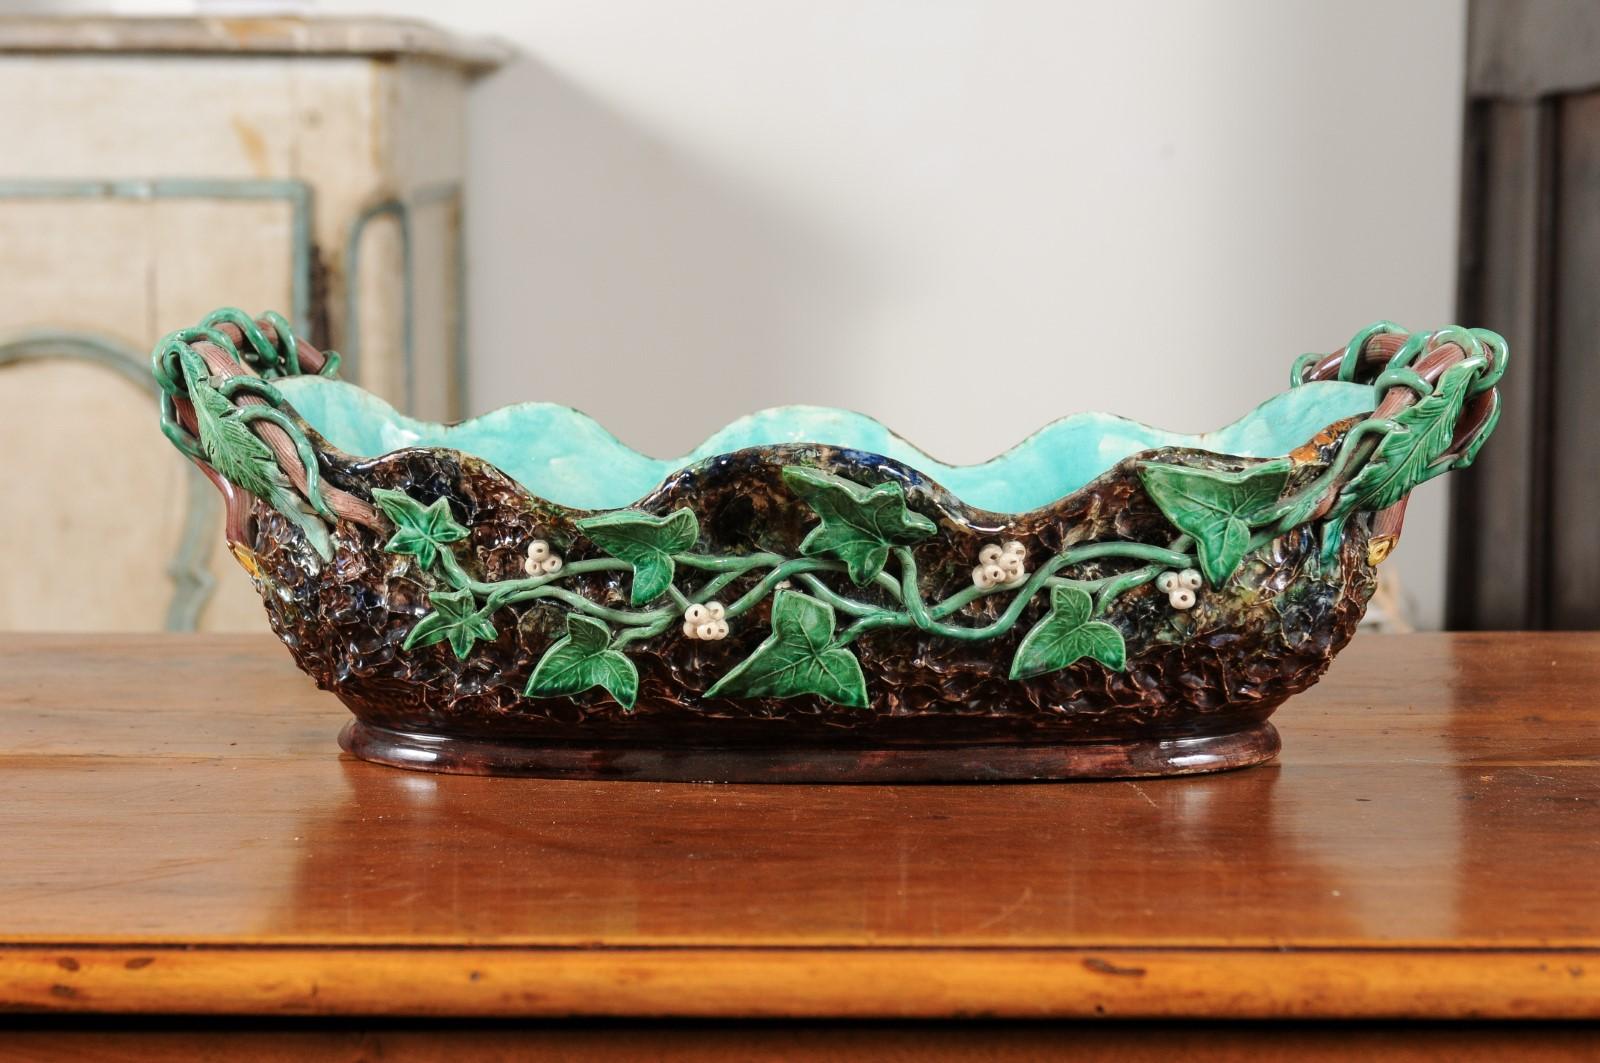 A French mid-19th century barbotine Majolica jardinière by French potter Thomas Sargent, with floral motifs. Born in France during the 19th century, this Palissy inspired Majolica jardinière features a lovely barbotine décor of delicate pastel